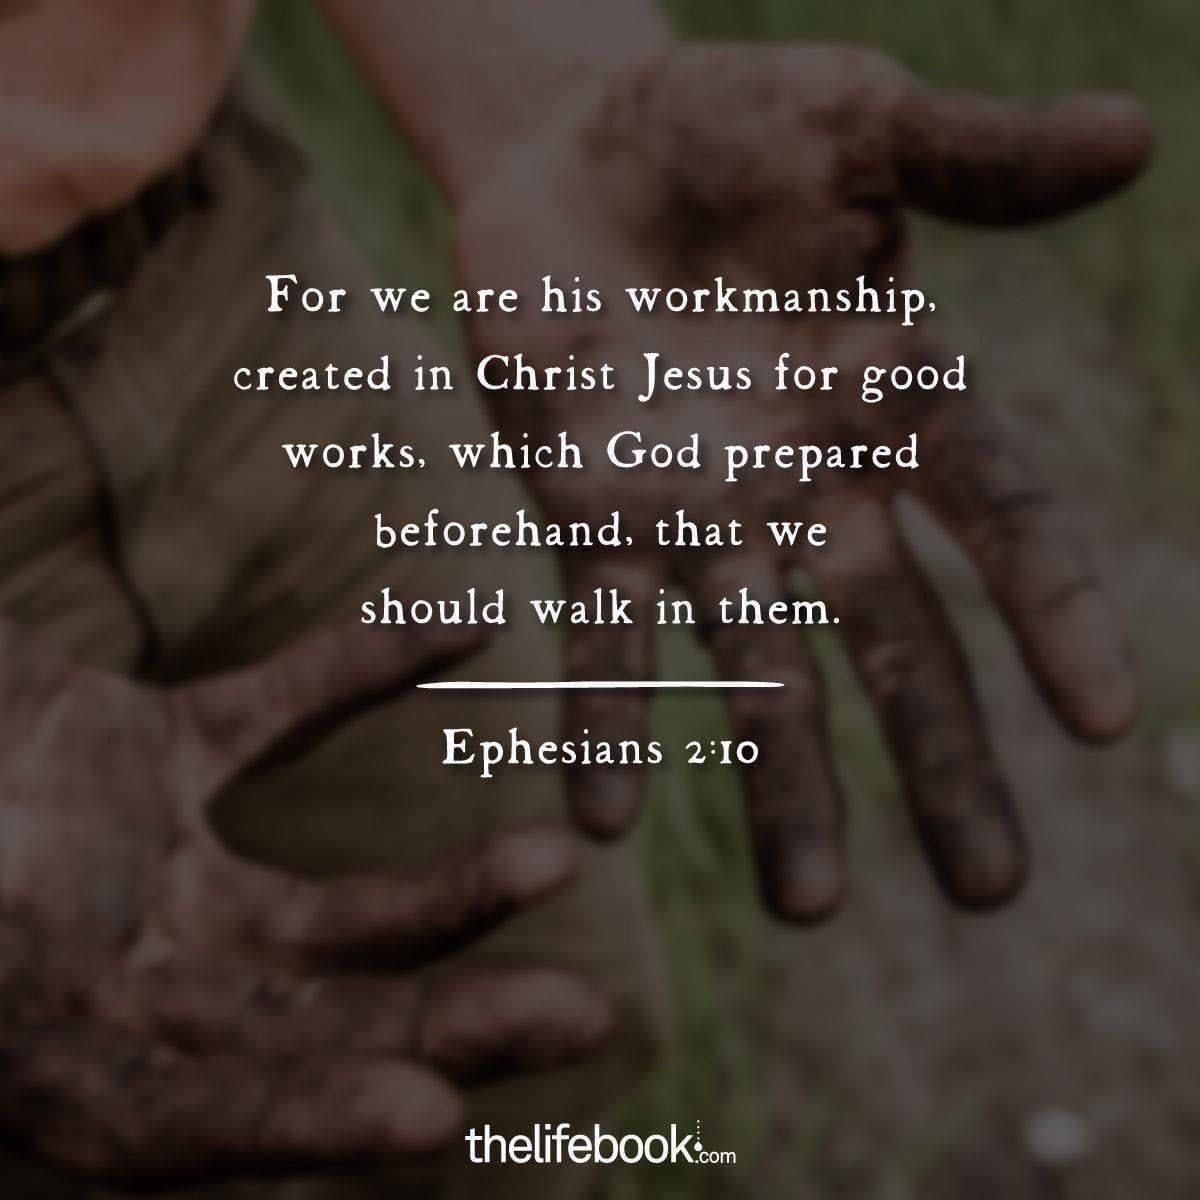 'For we are his workmanship, created in Christ Jesus for good works, which God prepared beforehand, that we should walk in them. Ephesians 2:10 thelifebook.com'